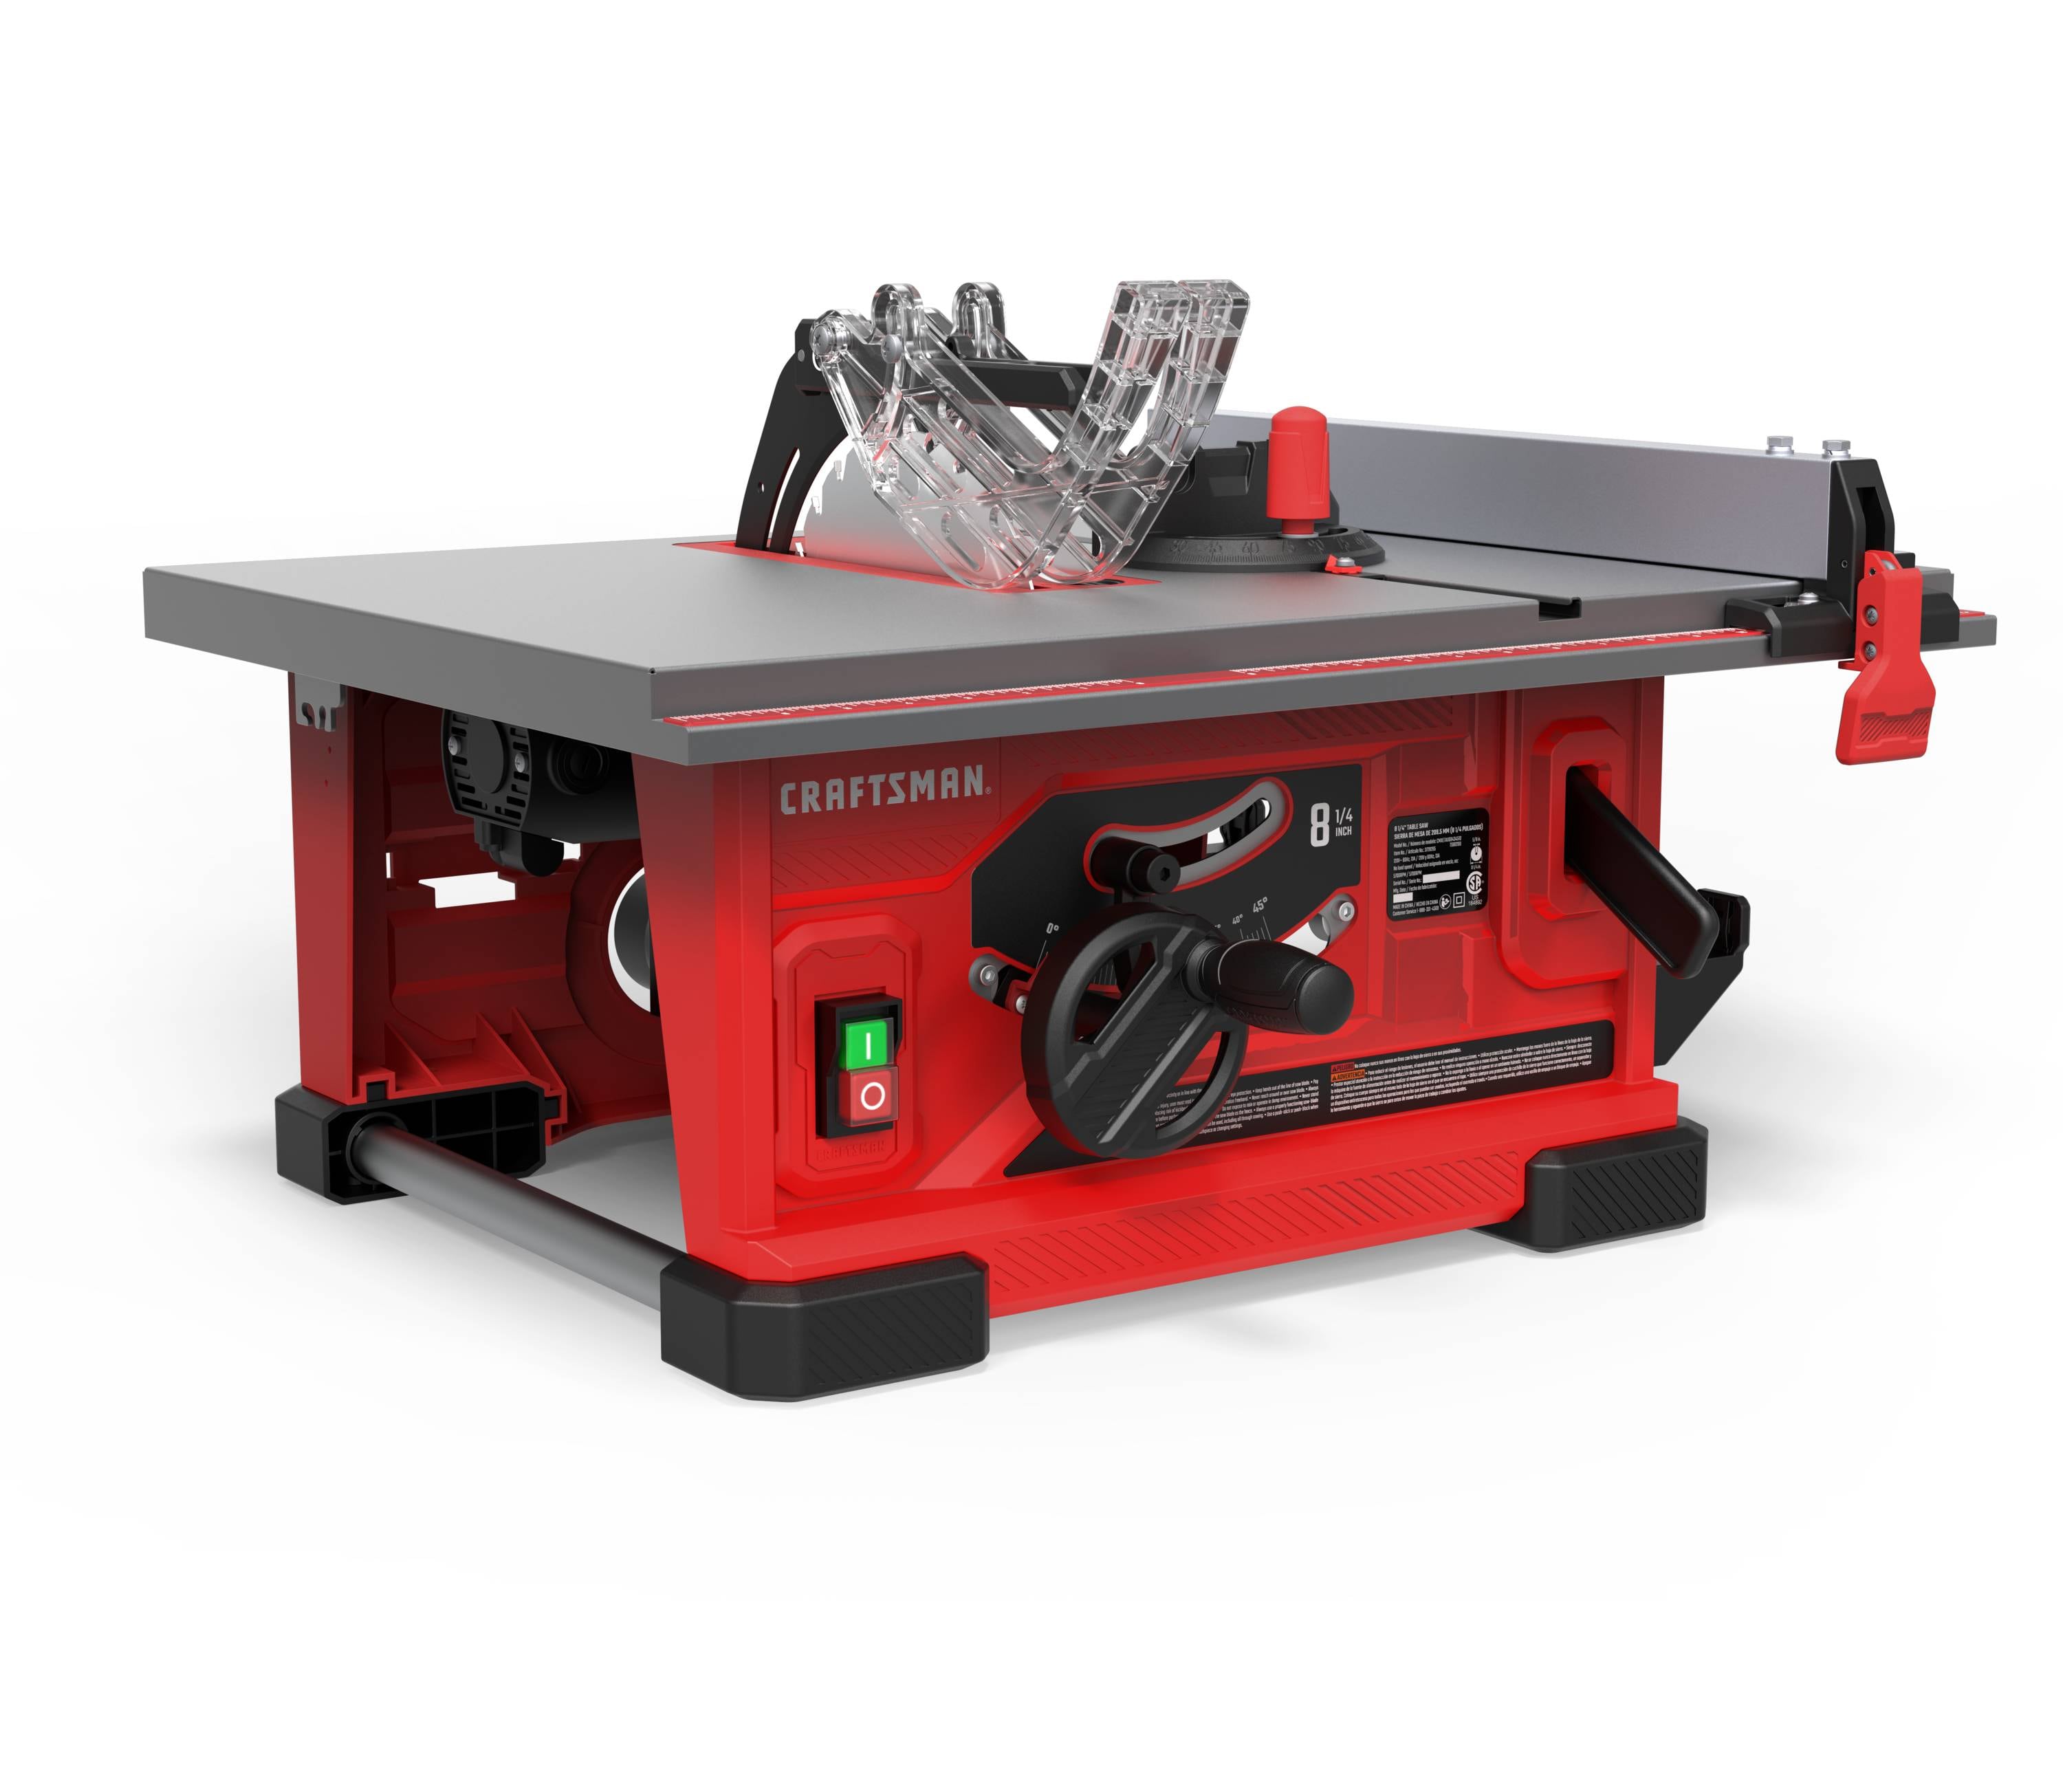 how much is a craftsman table saw? 2